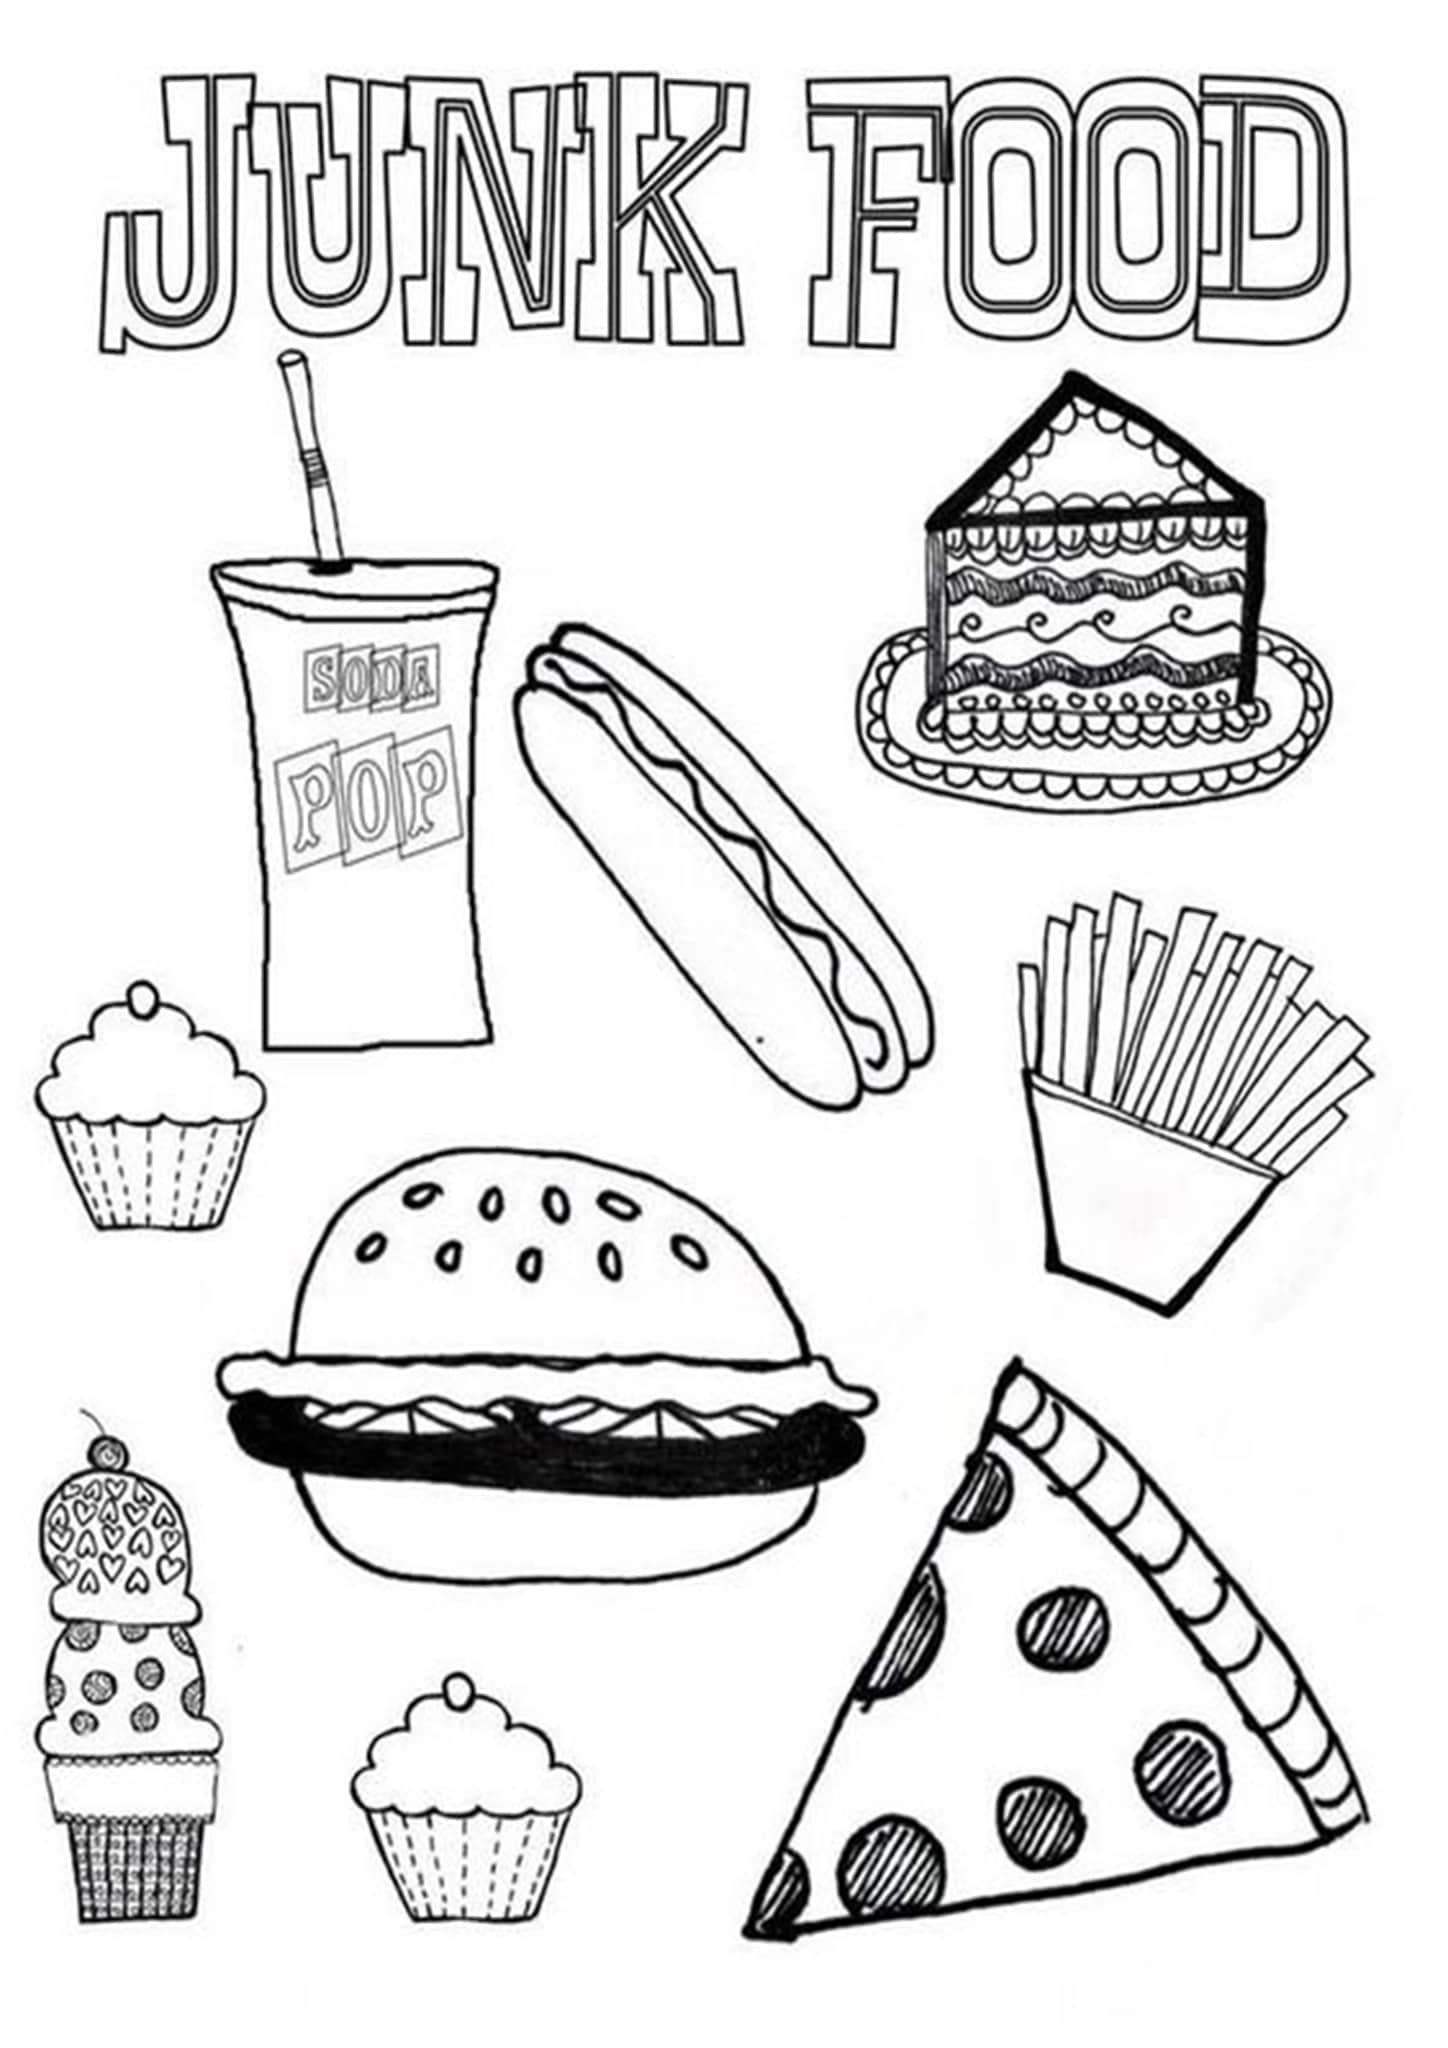 Free & Easy To Print Food Coloring Pages Tulamama